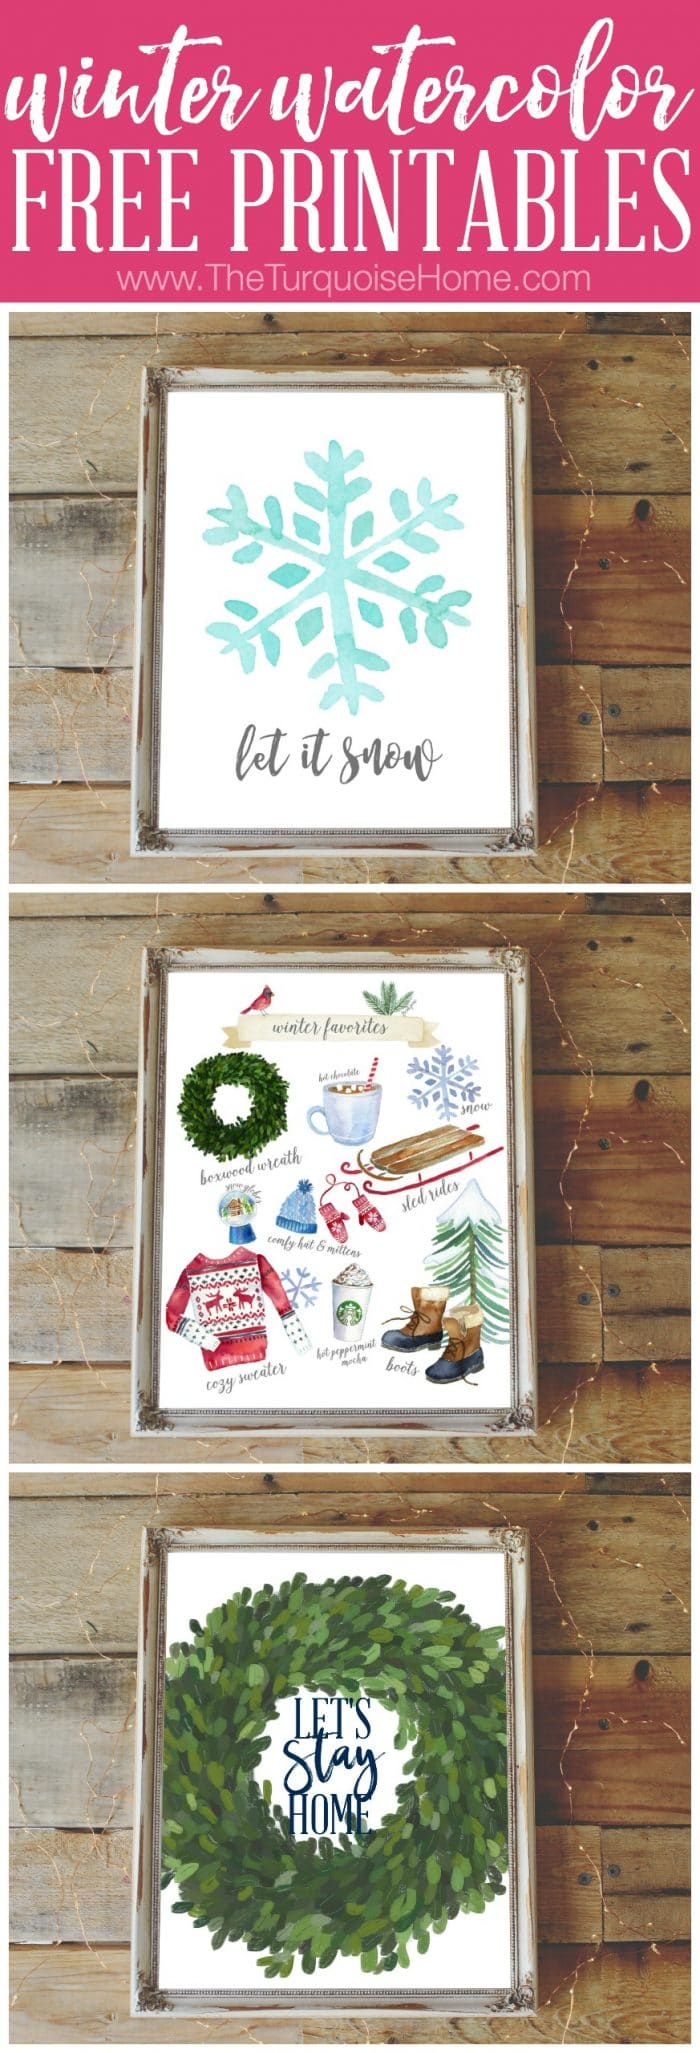 Winter Favorites Free Printables - just for you!! Yay!